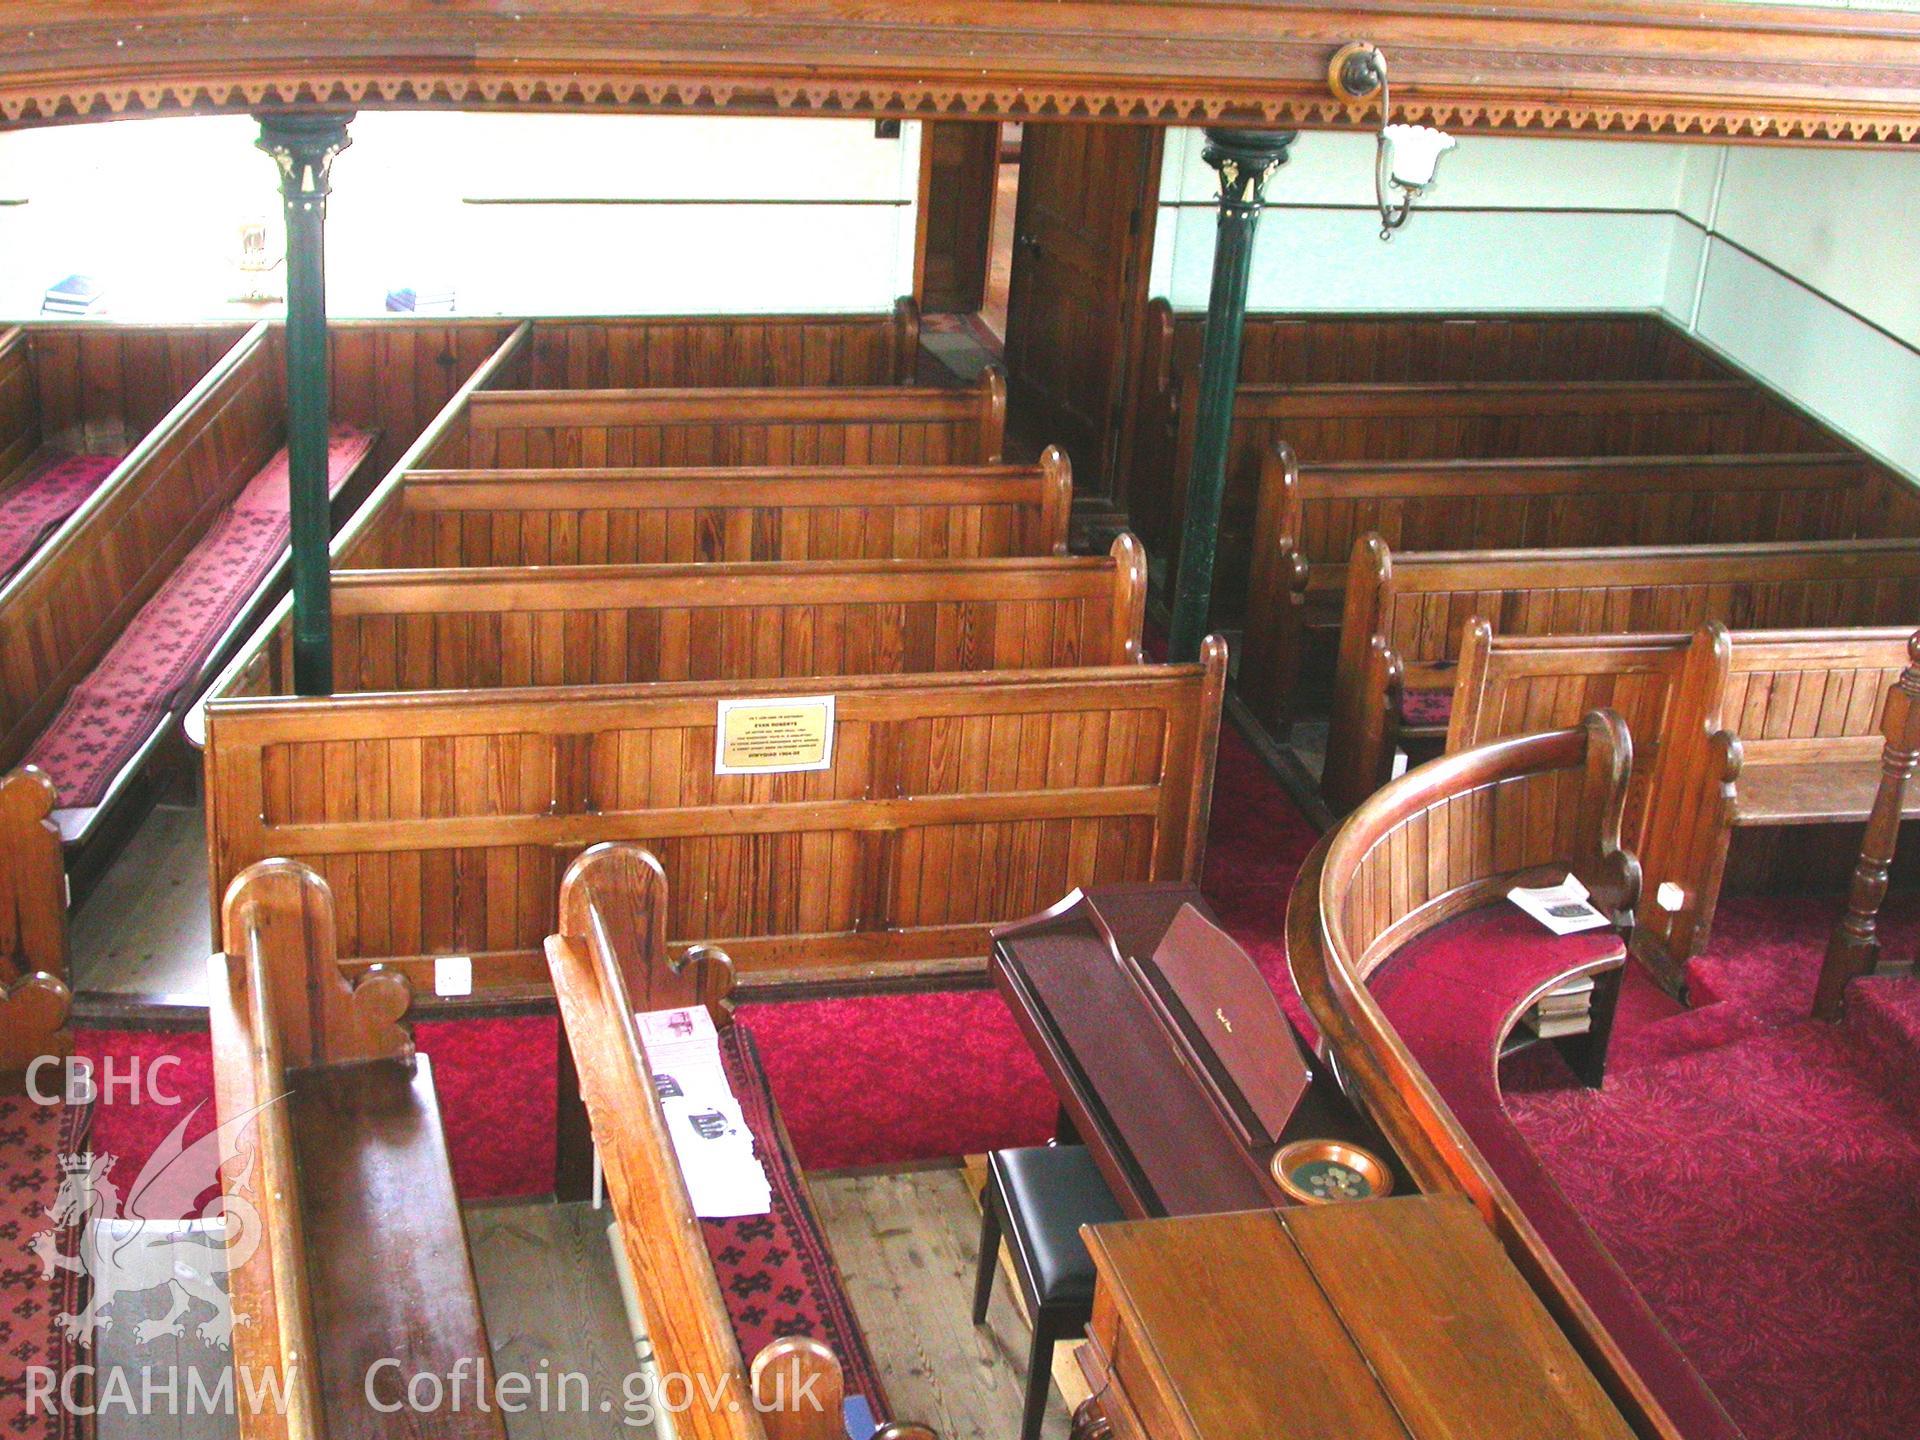 Evan Roberts's pew and the set fawr or great seat for deacons in front of the pulpit.